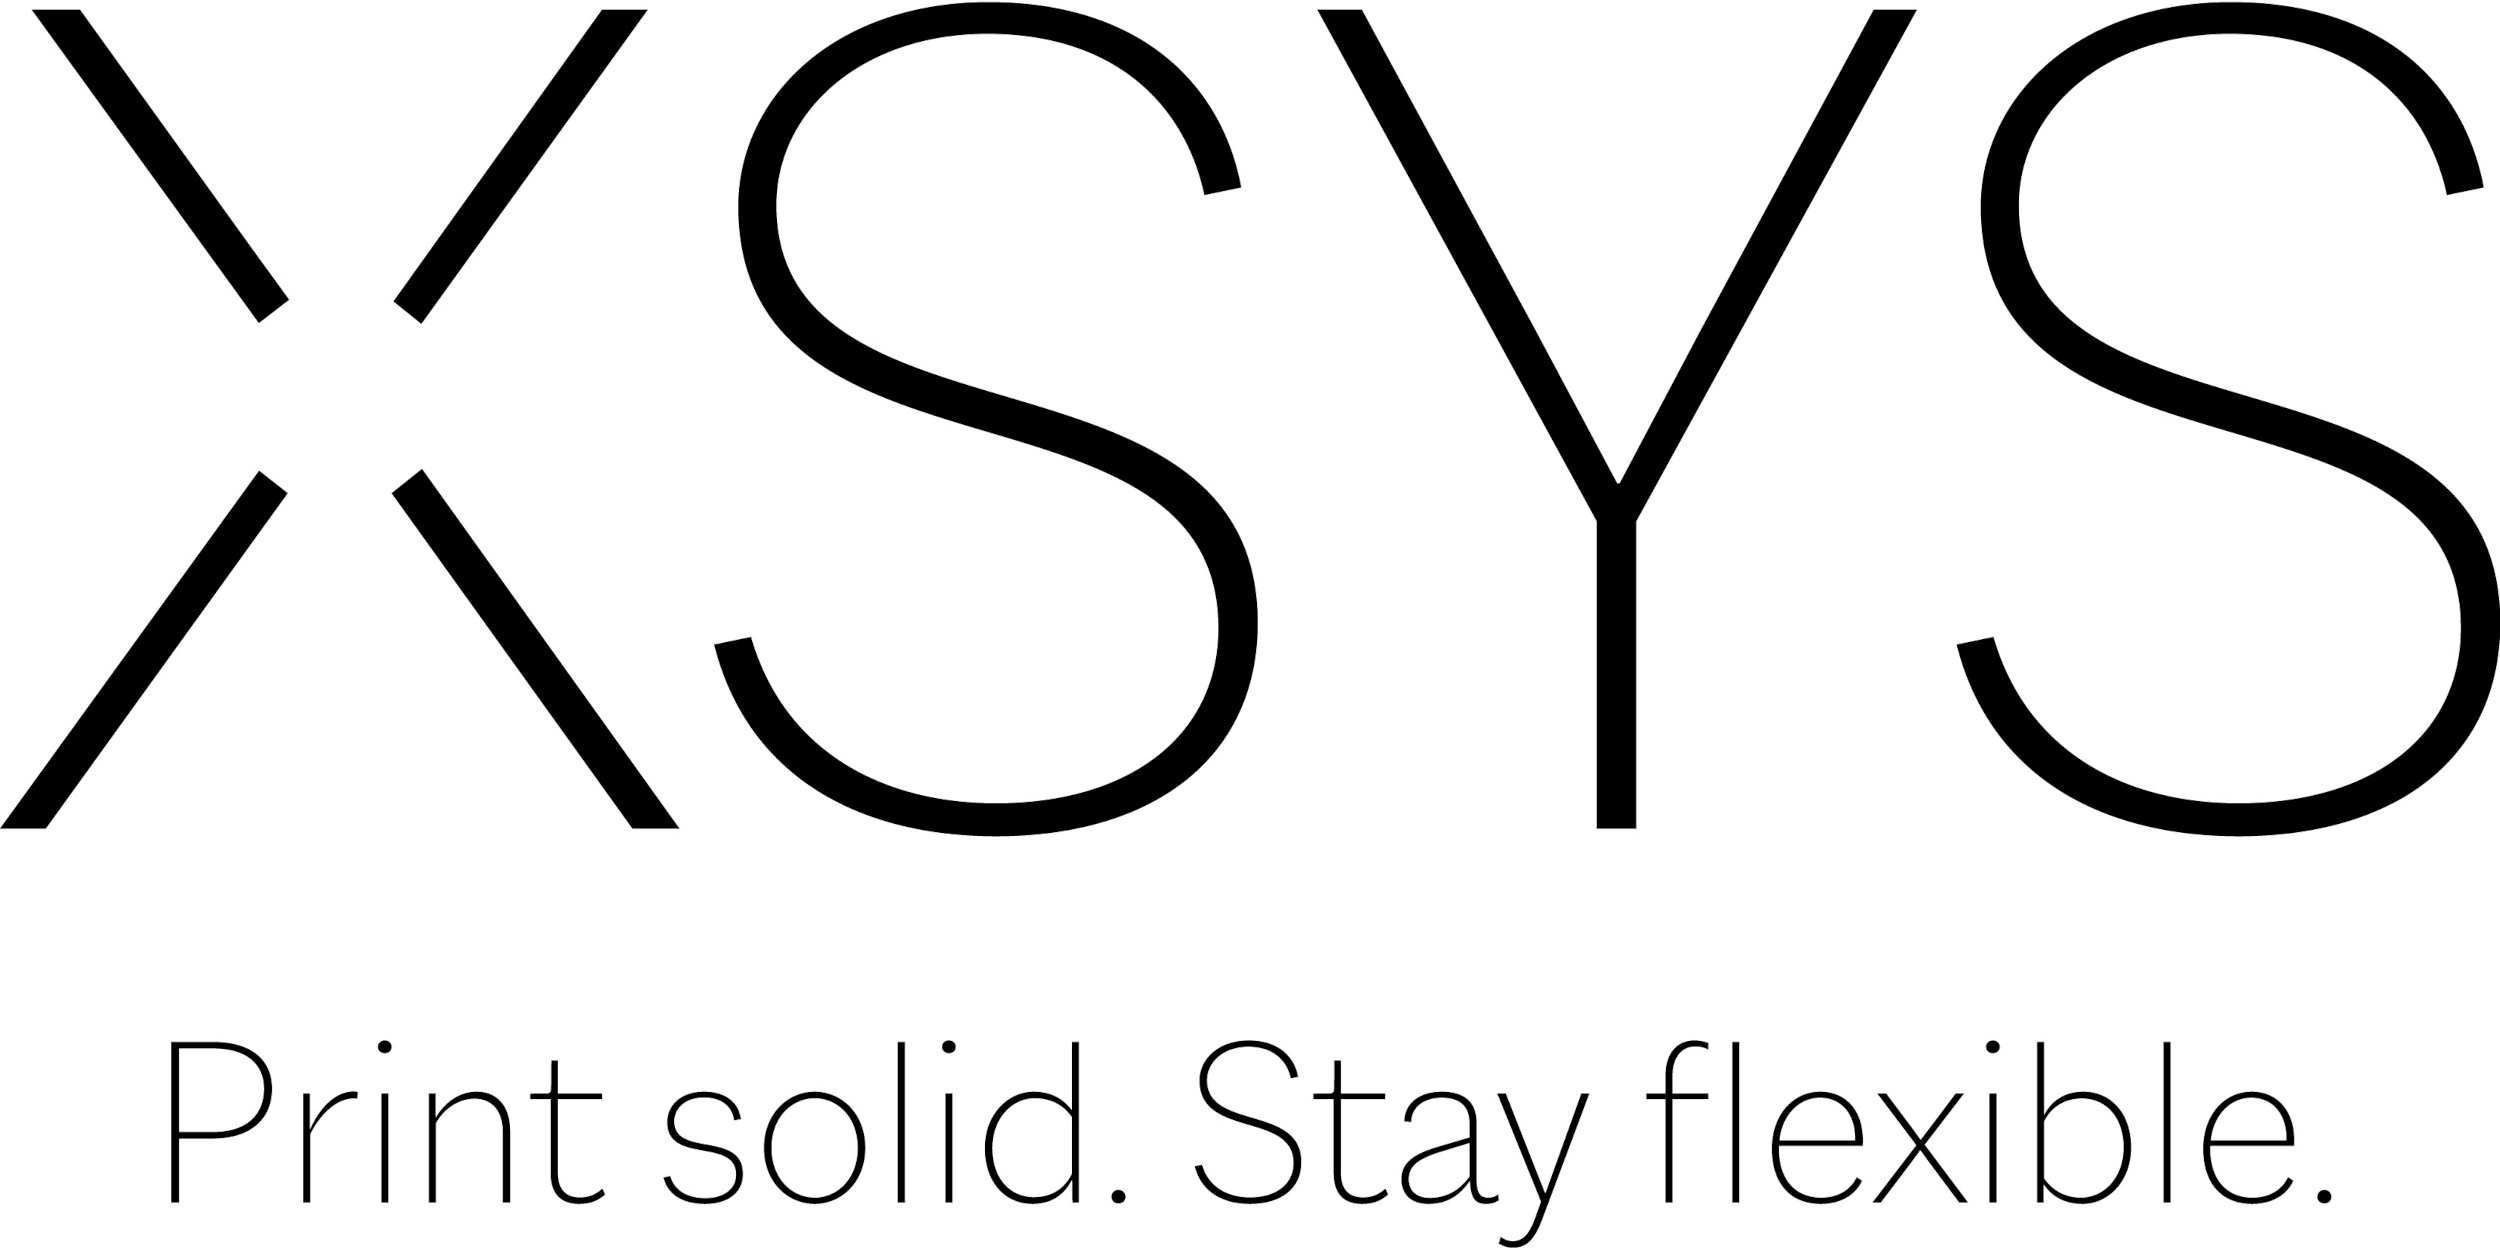 XSYS logo in black. Print Solid. Stay Flexible